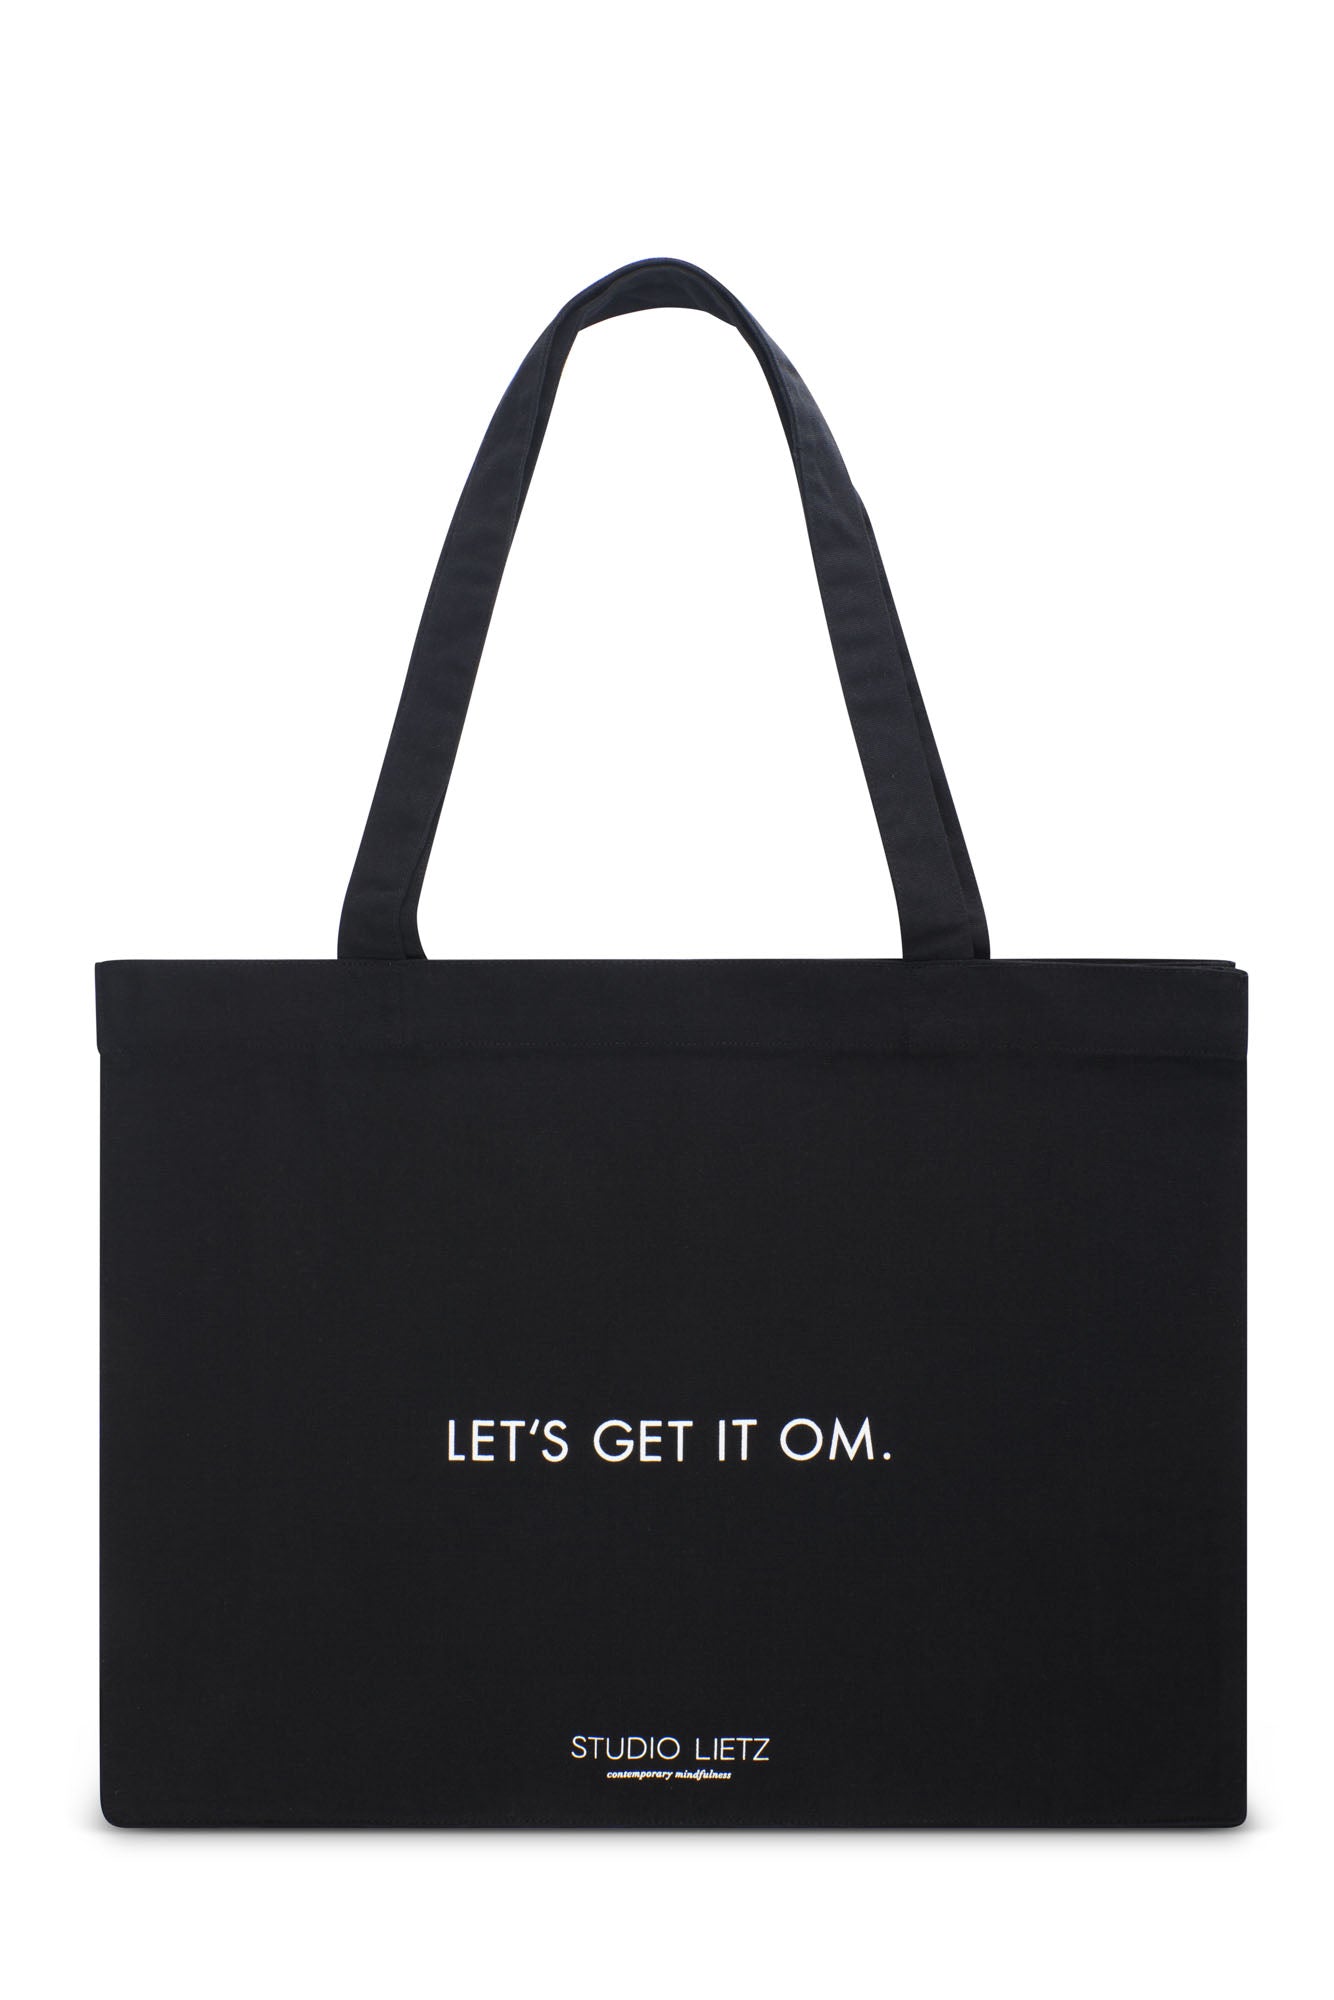 THE MAXI TOTE | LET'S GET IT OM.